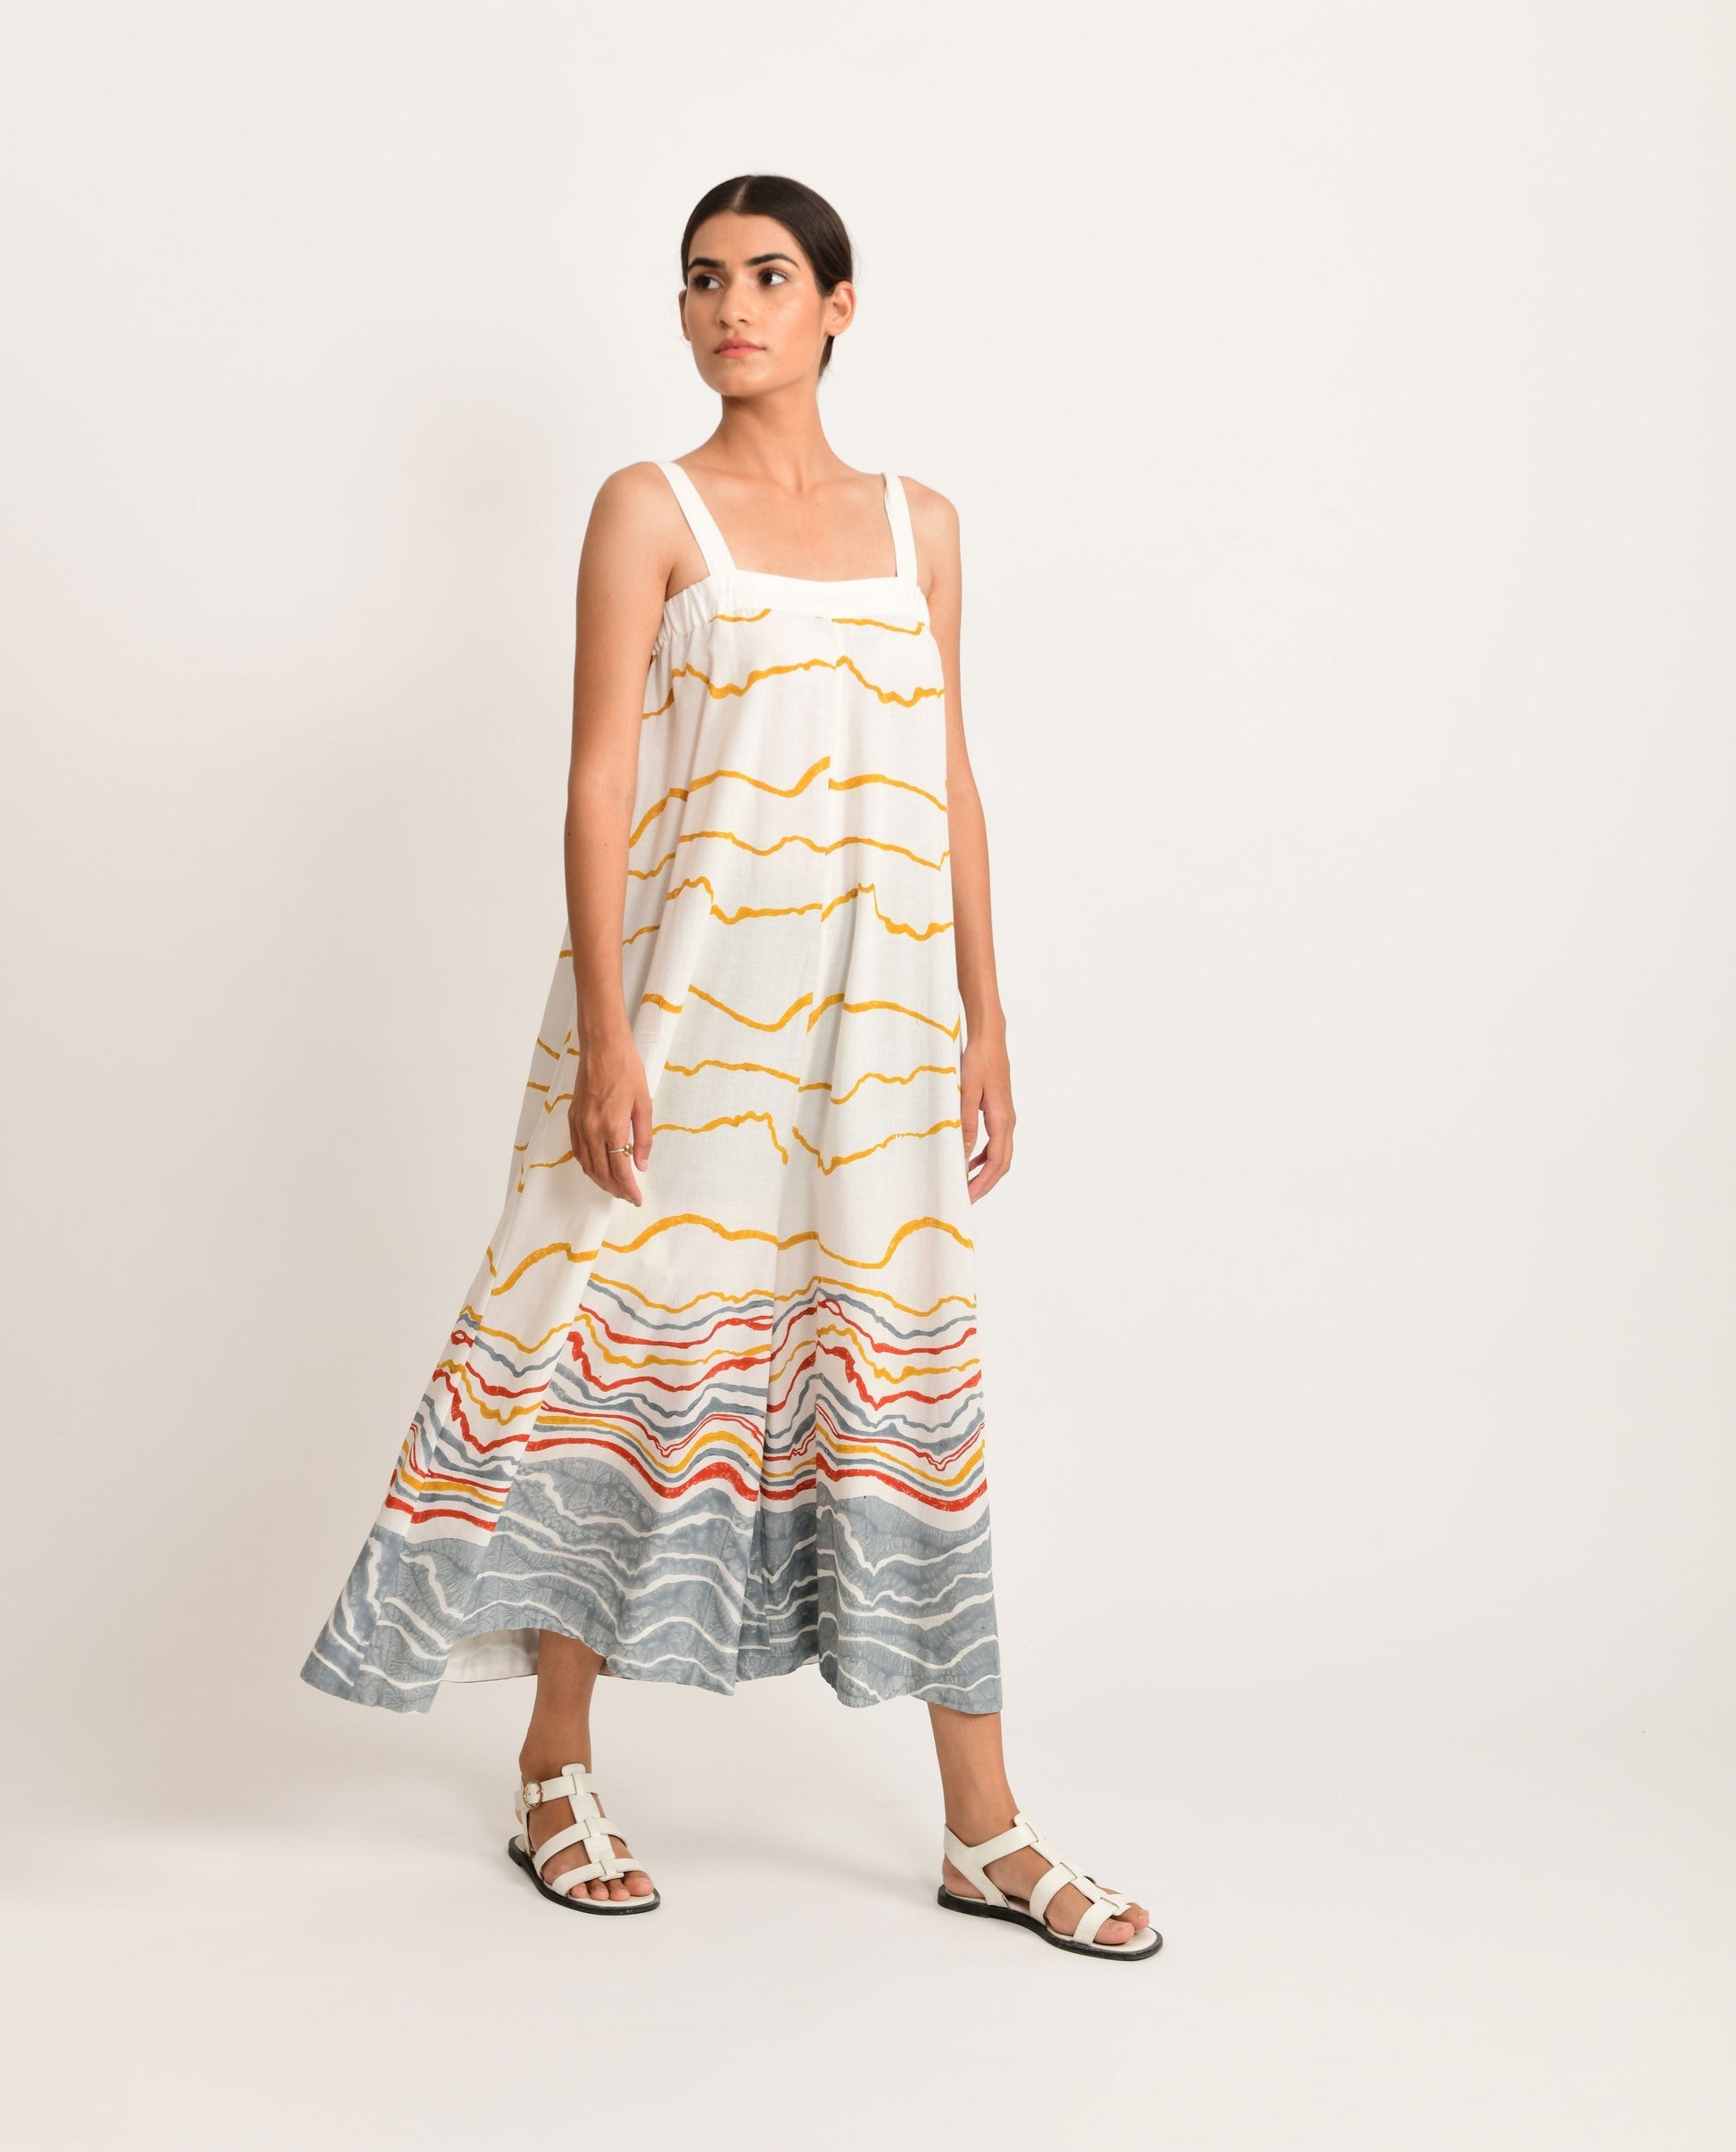 Casual Block Printed Jumpsuit by Rias Jaipur with Azo Free Dye, Bamboo, Block Prints, Casual Wear, Cotton, Jumpsuits, Organic Cotton, Parat, Parat by Rias Jaipur, Regular Fit, White, Womenswear at Kamakhyaa for sustainable fashion